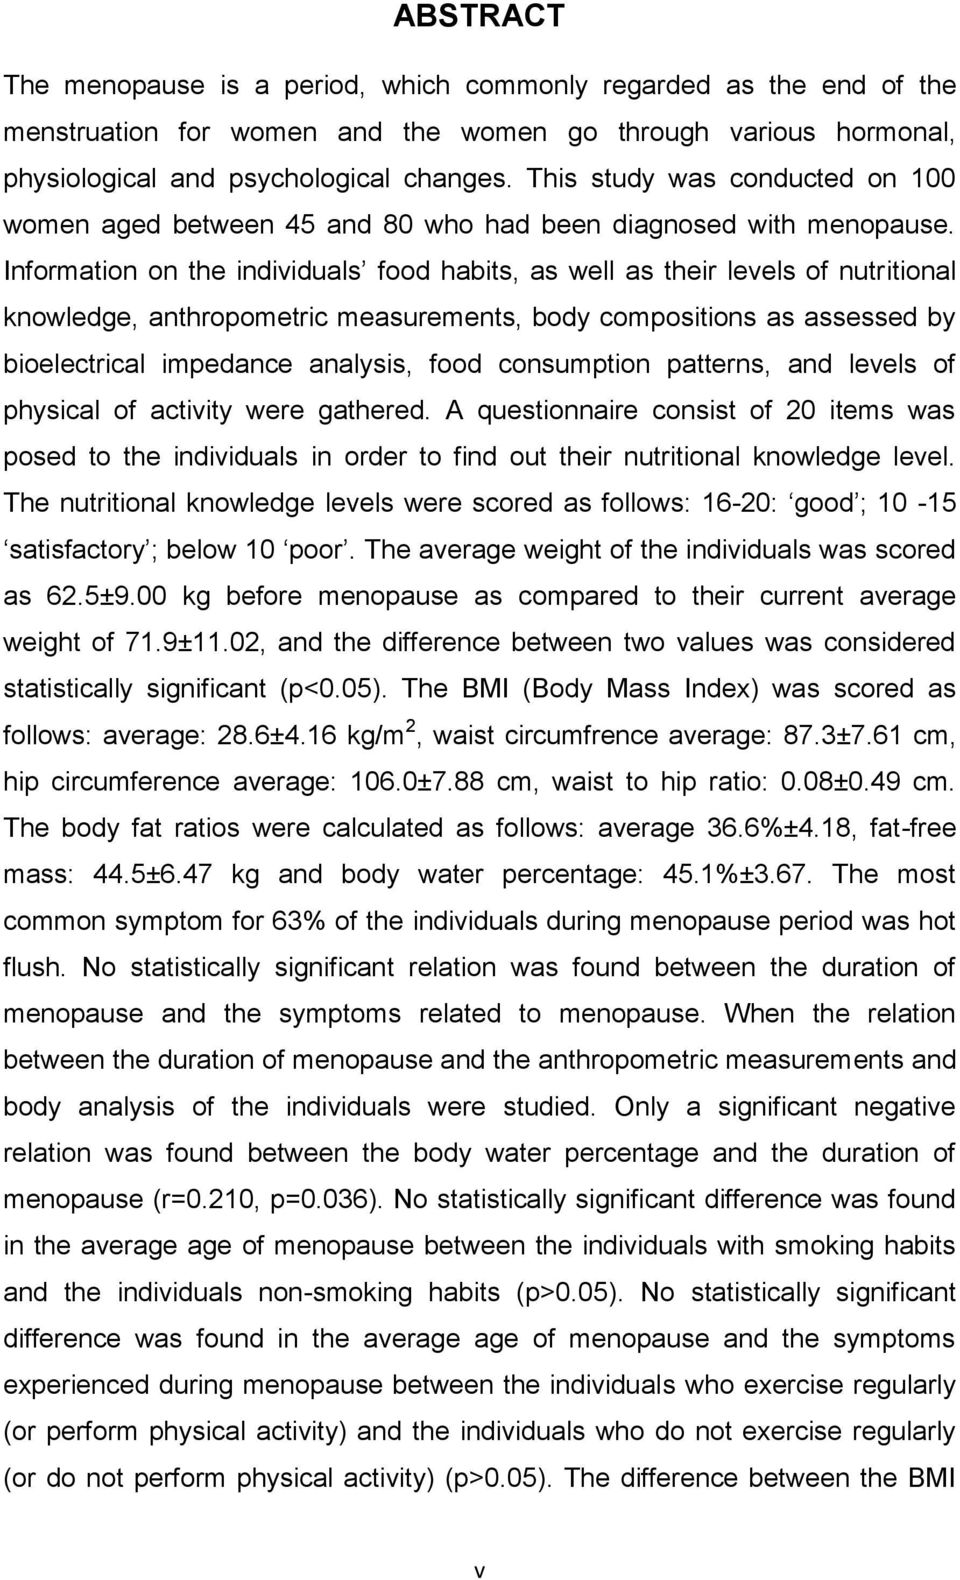 Information on the individuals food habits, as well as their levels of nutritional knowledge, anthropometric measurements, body compositions as assessed by bioelectrical impedance analysis, food